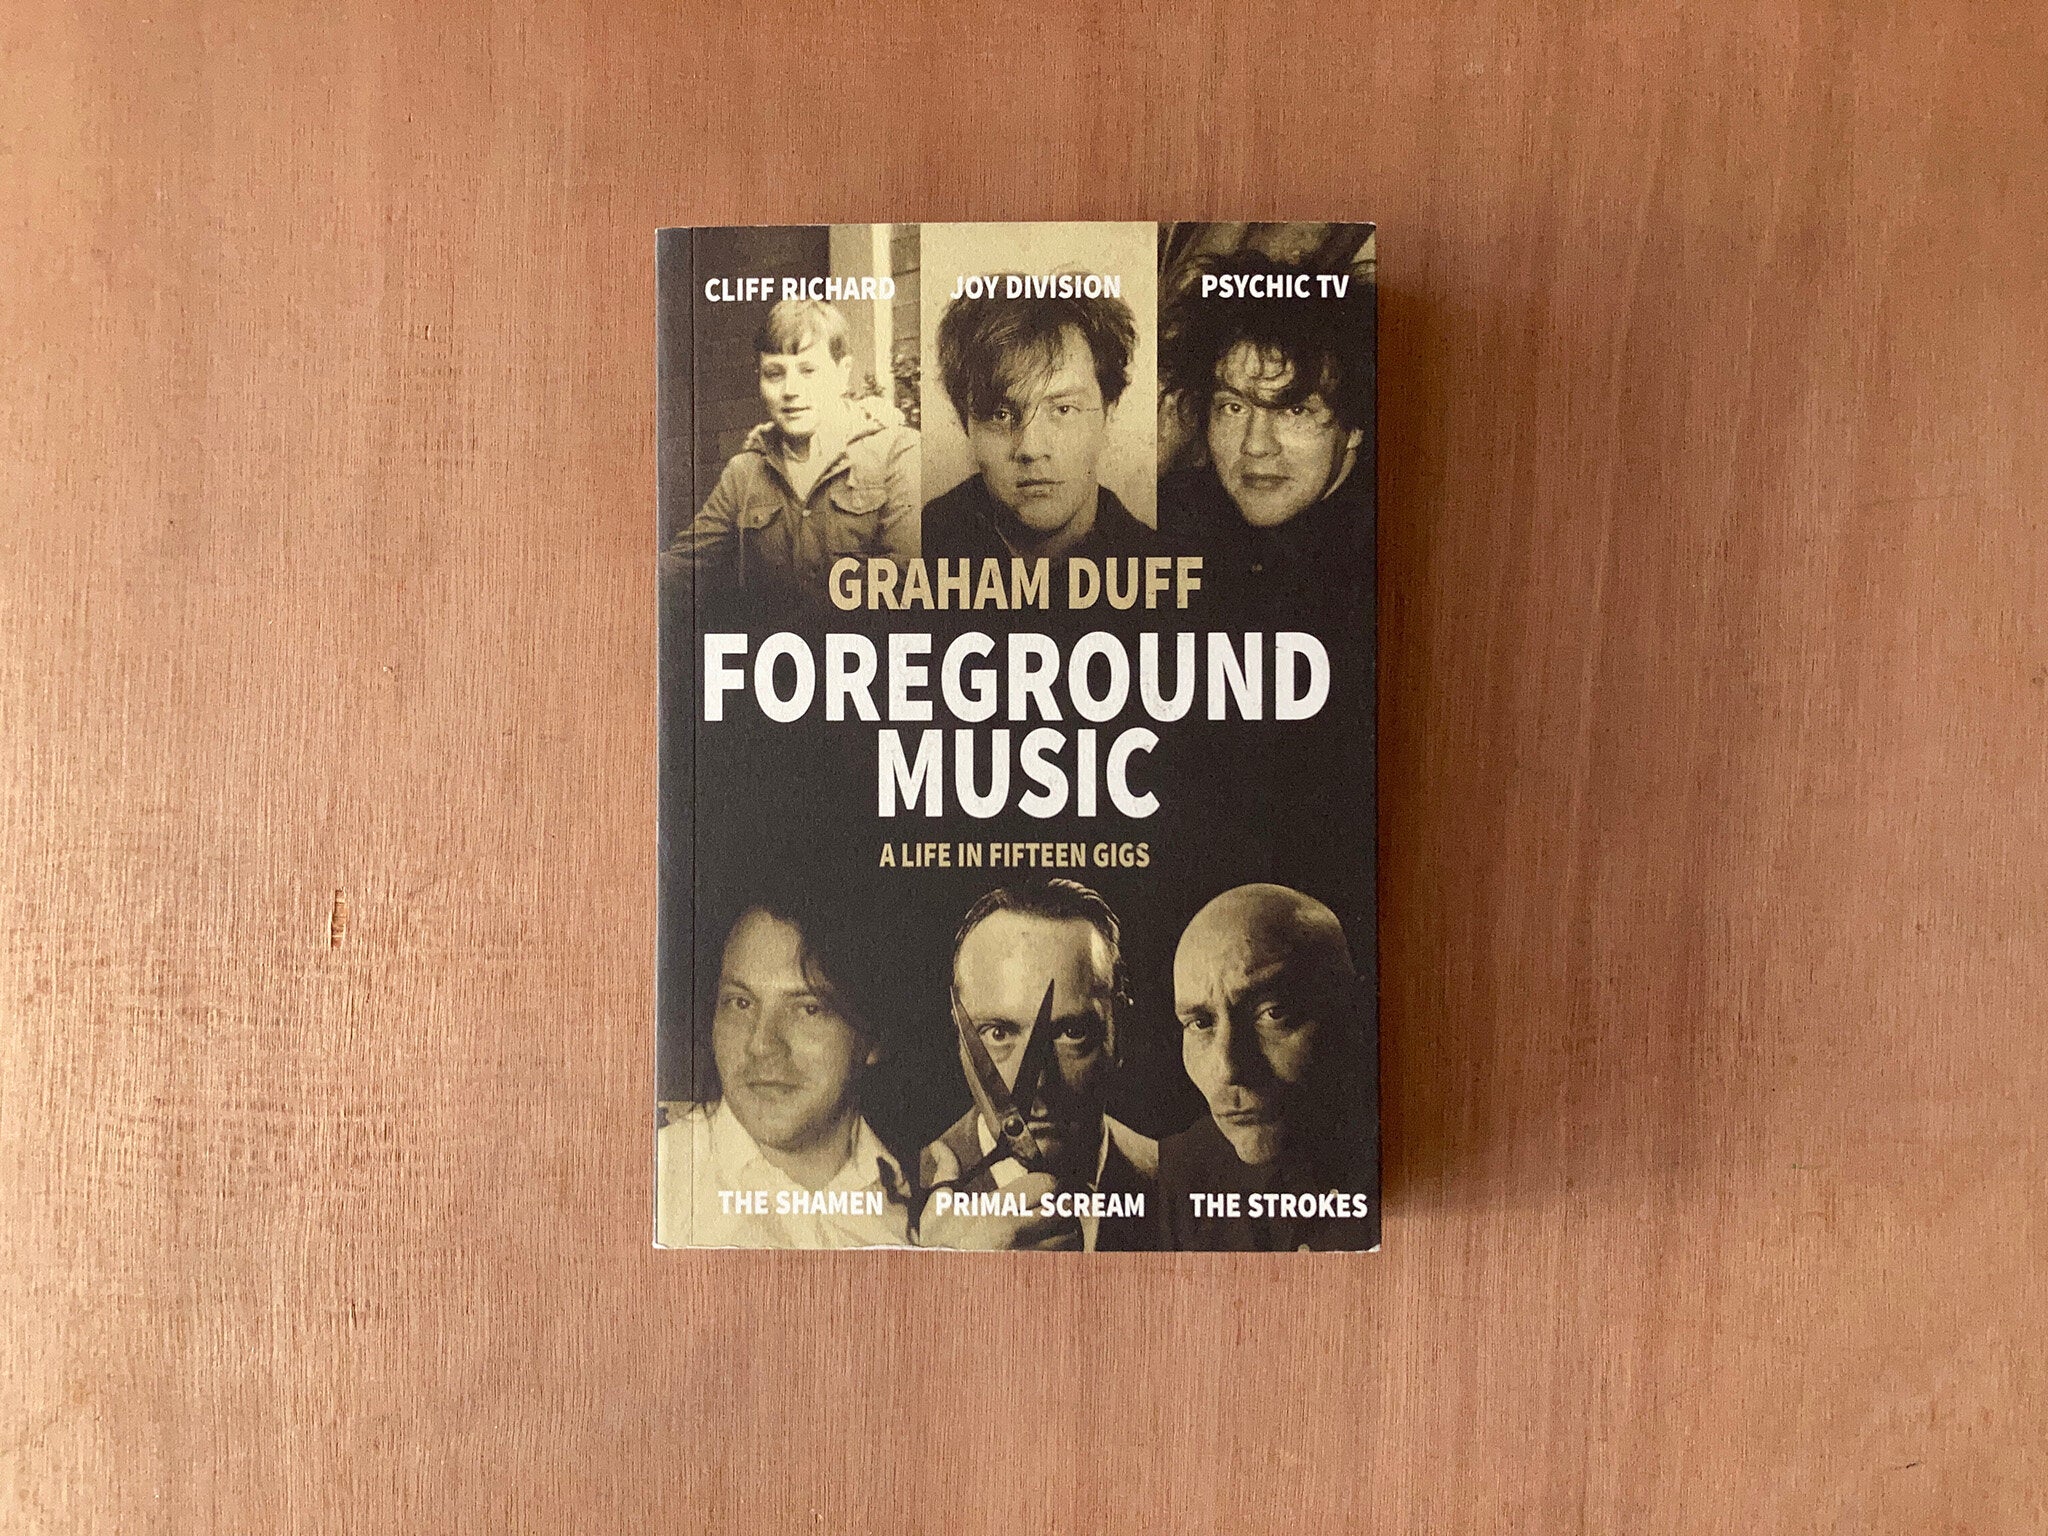 FOREGROUND MUSIC: A LIFE IN FIFTEEN GIGS by Graham Duff